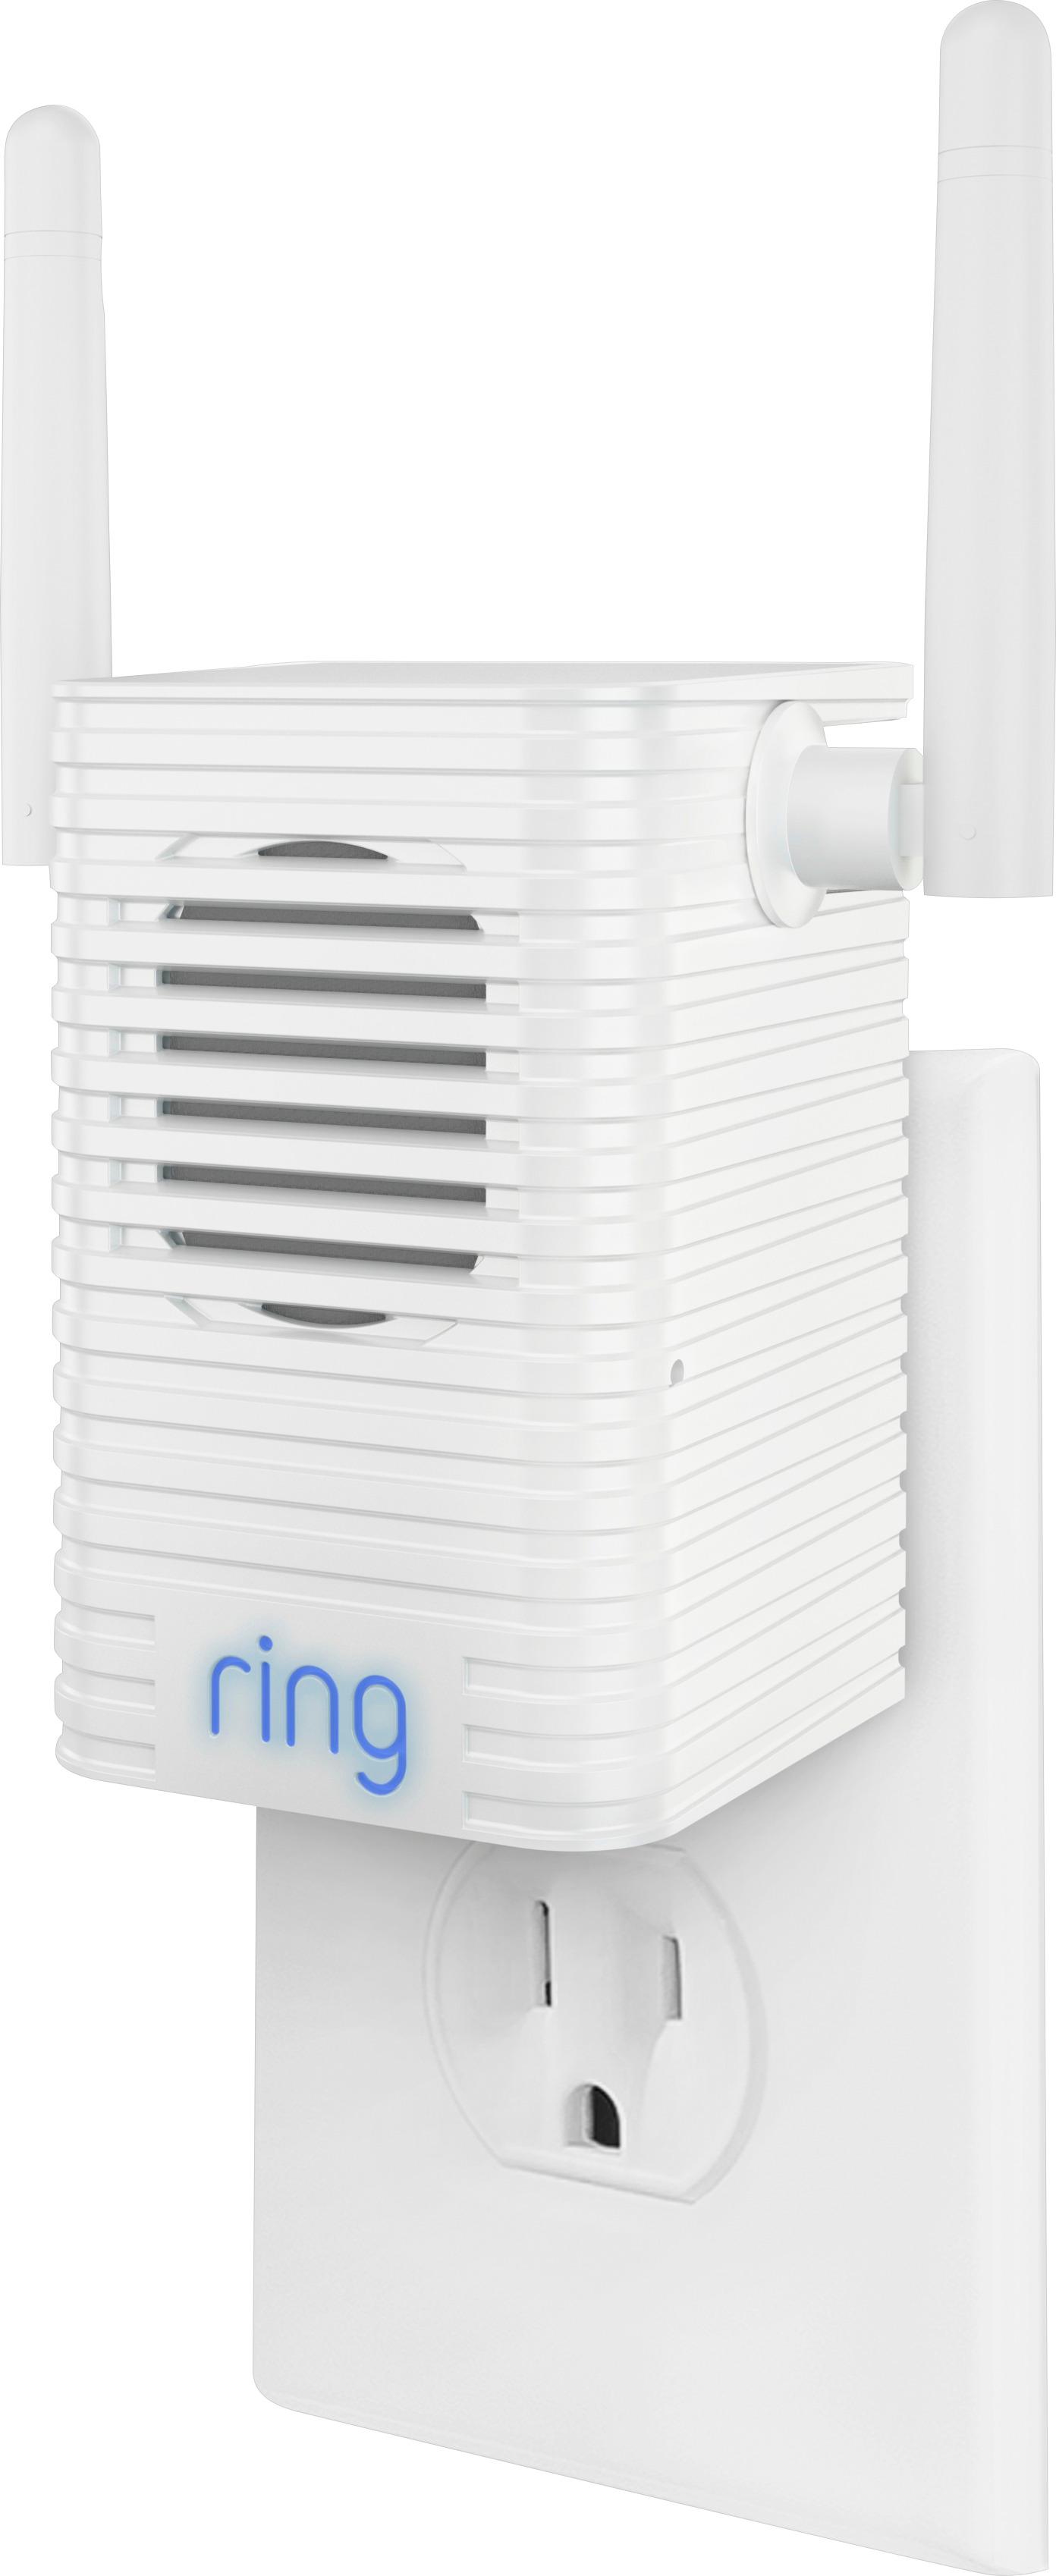 Ring 8AC1P6-0EN0 Chime Pro Wi-Fi Extender and Indoor Chime 